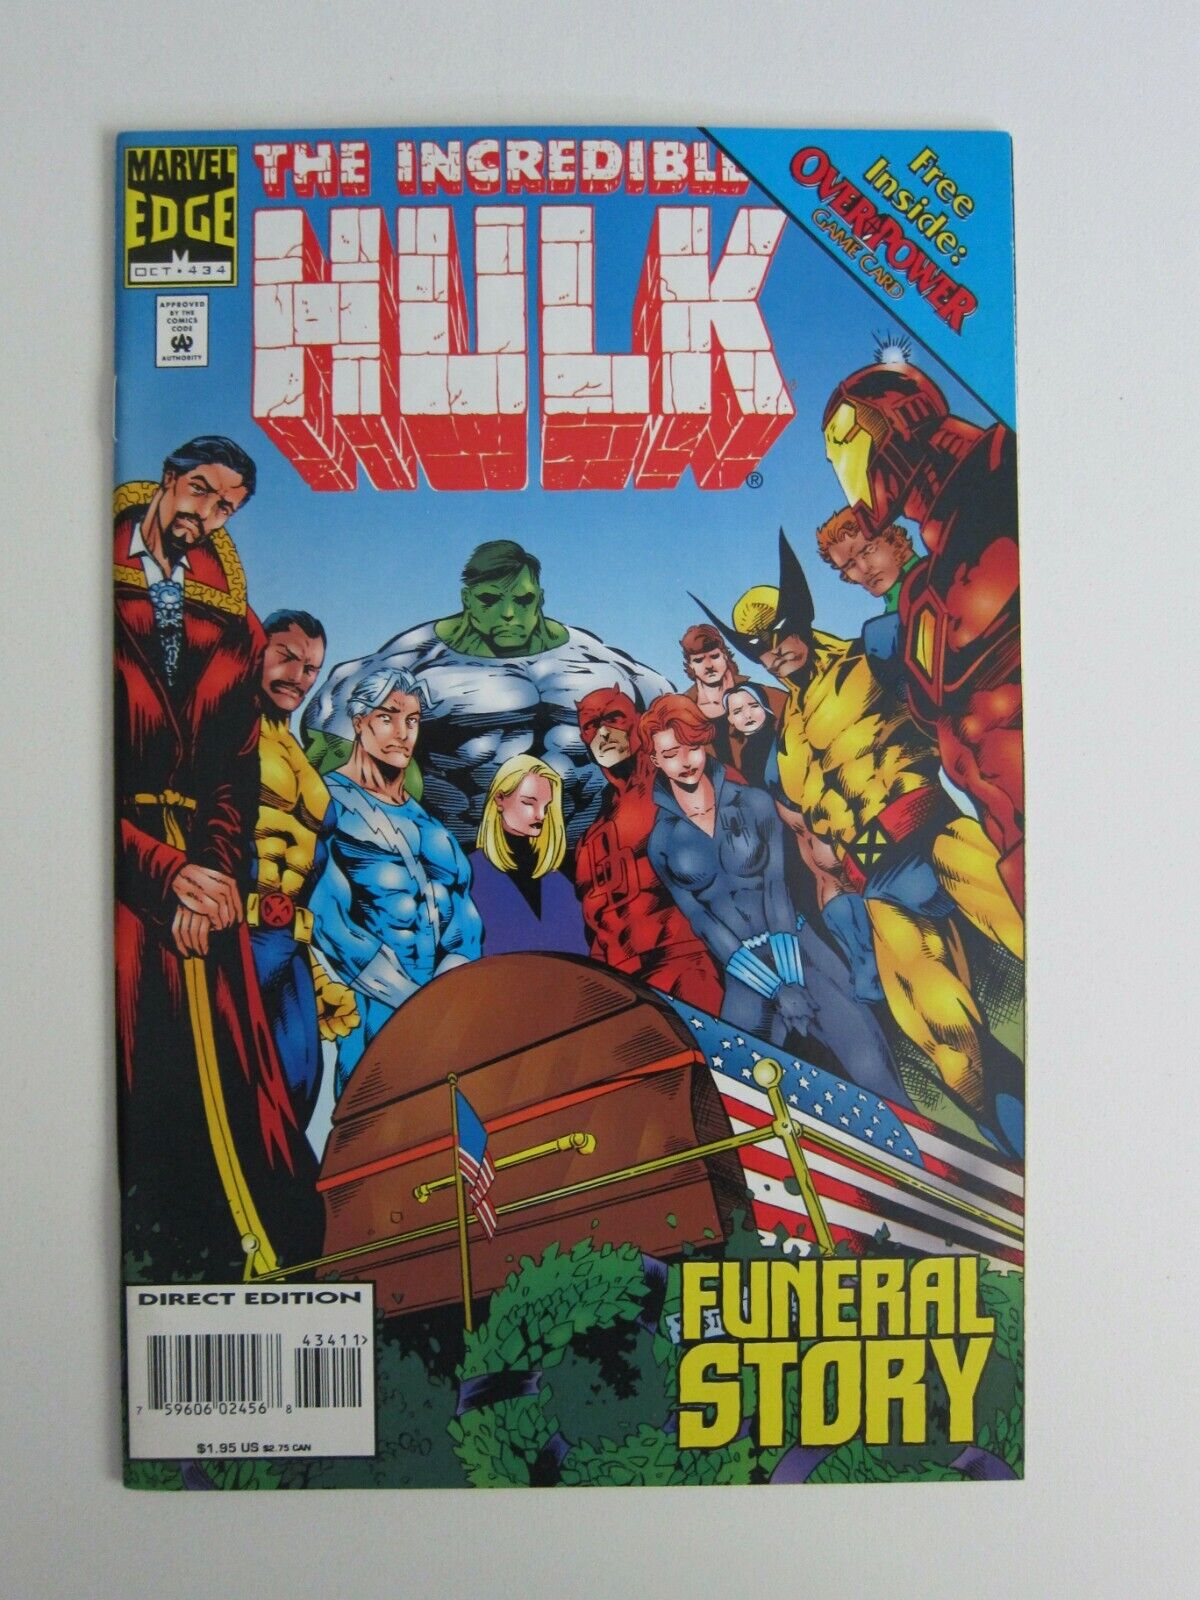 INCREDIBLE HULK #434 VF+ FUNERAL NICK FURY AVENGERS W/ OVER POWER GAME CARDS